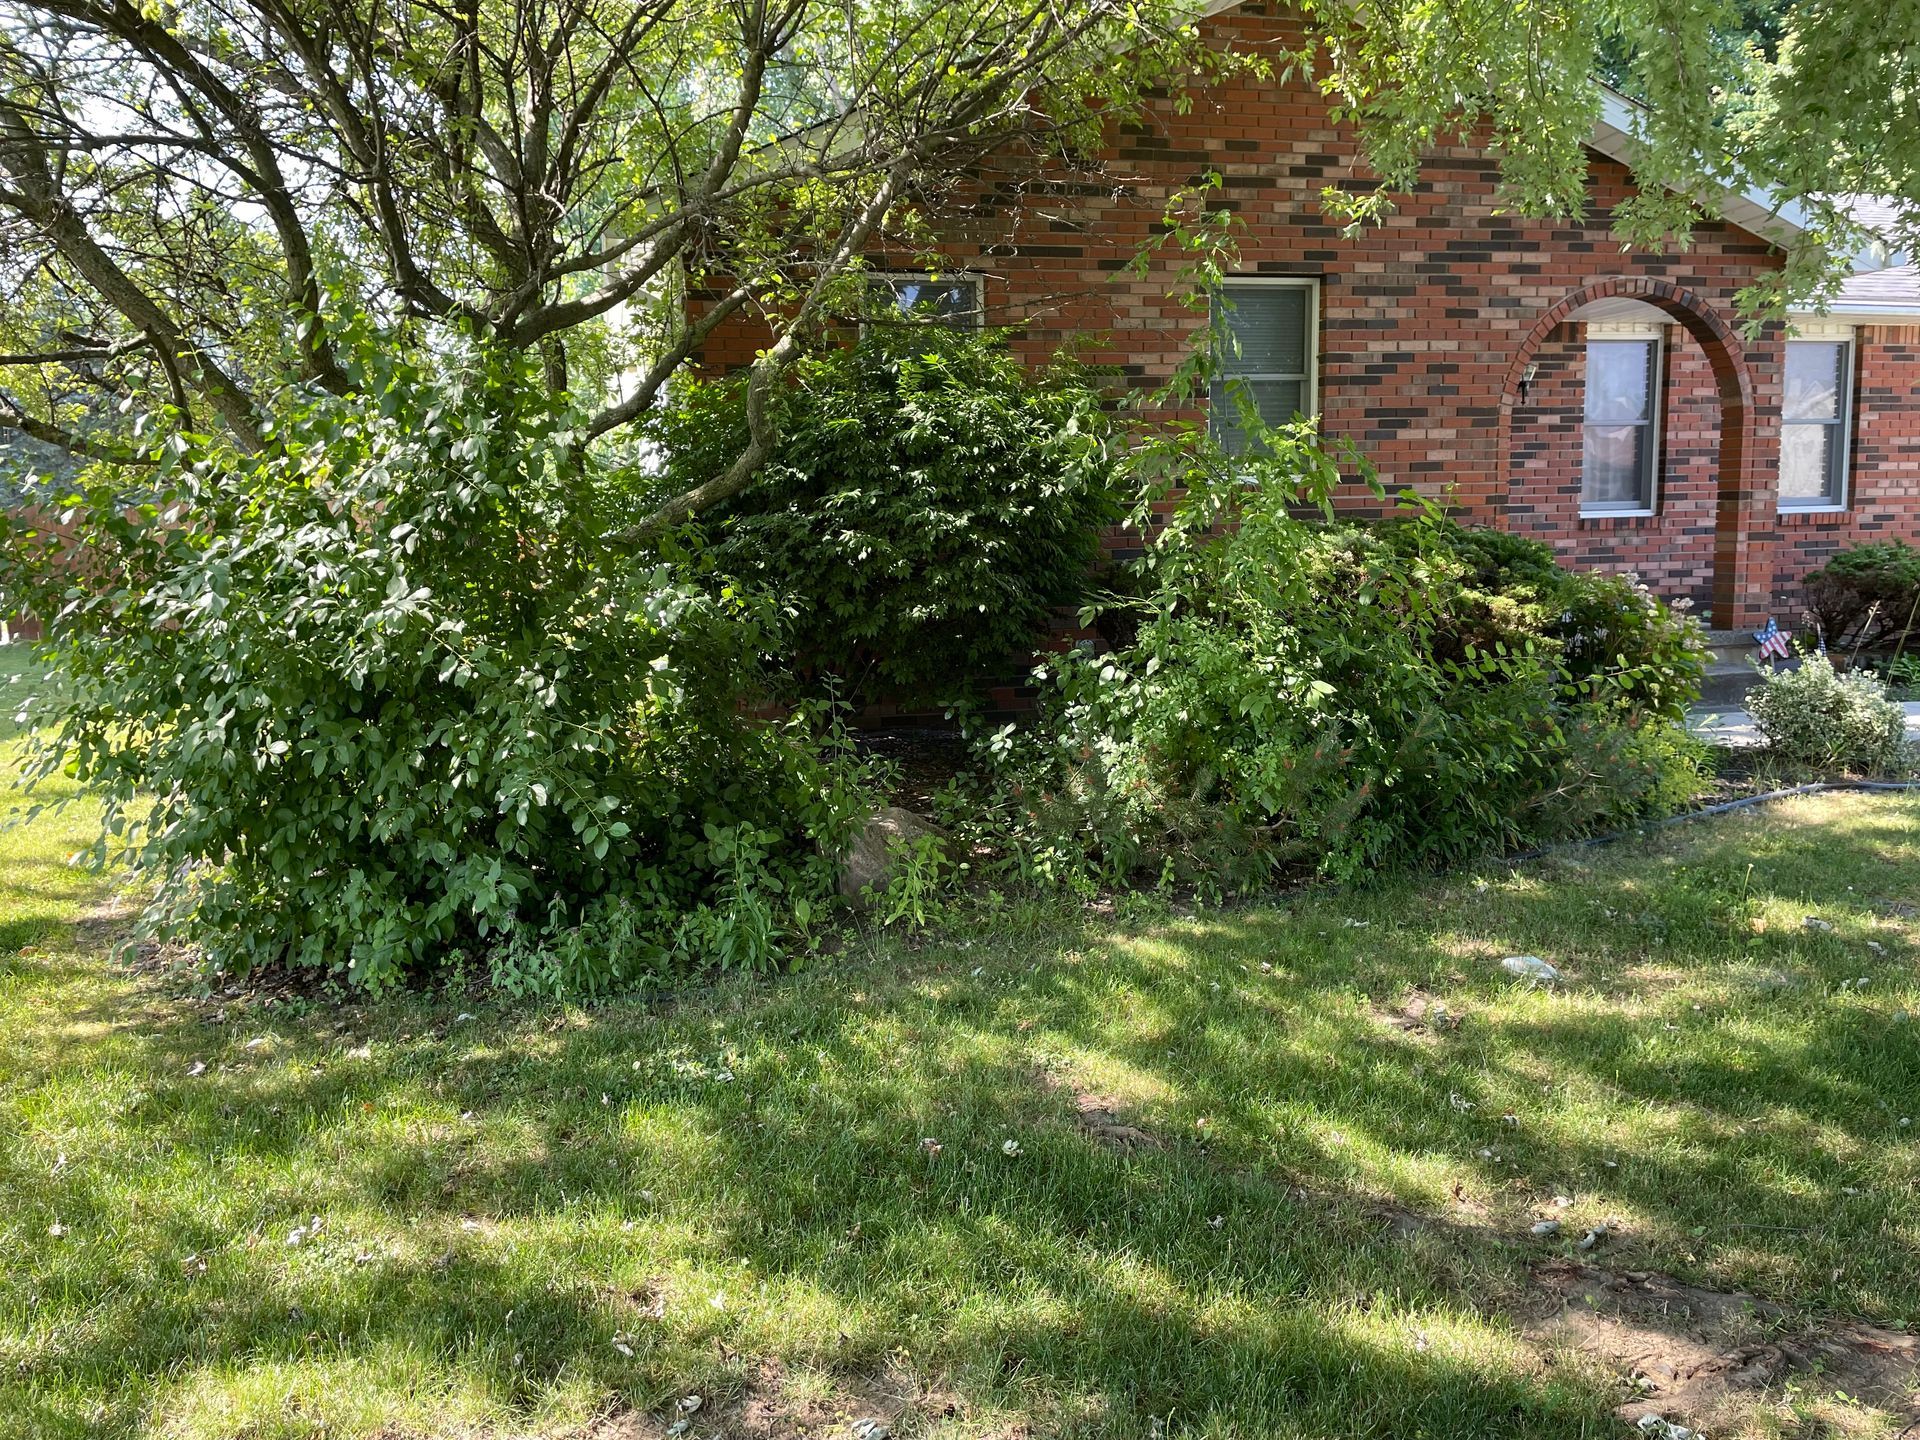 Overgrown garden in front of a brick house with various bushes and a tree needing maintenance